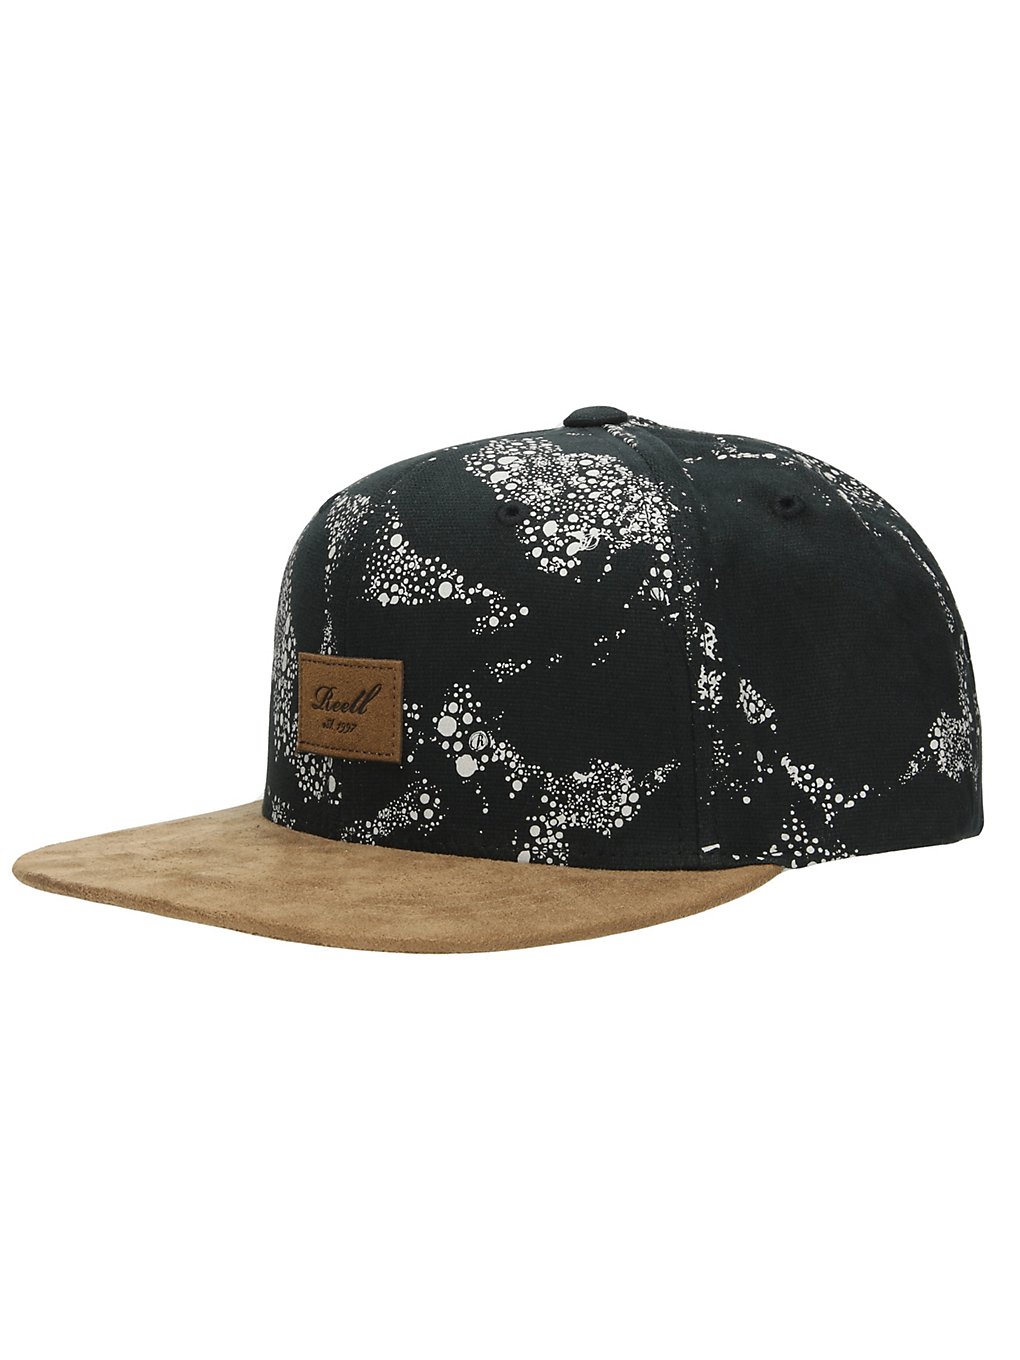 REELL Suede Cap camouflage